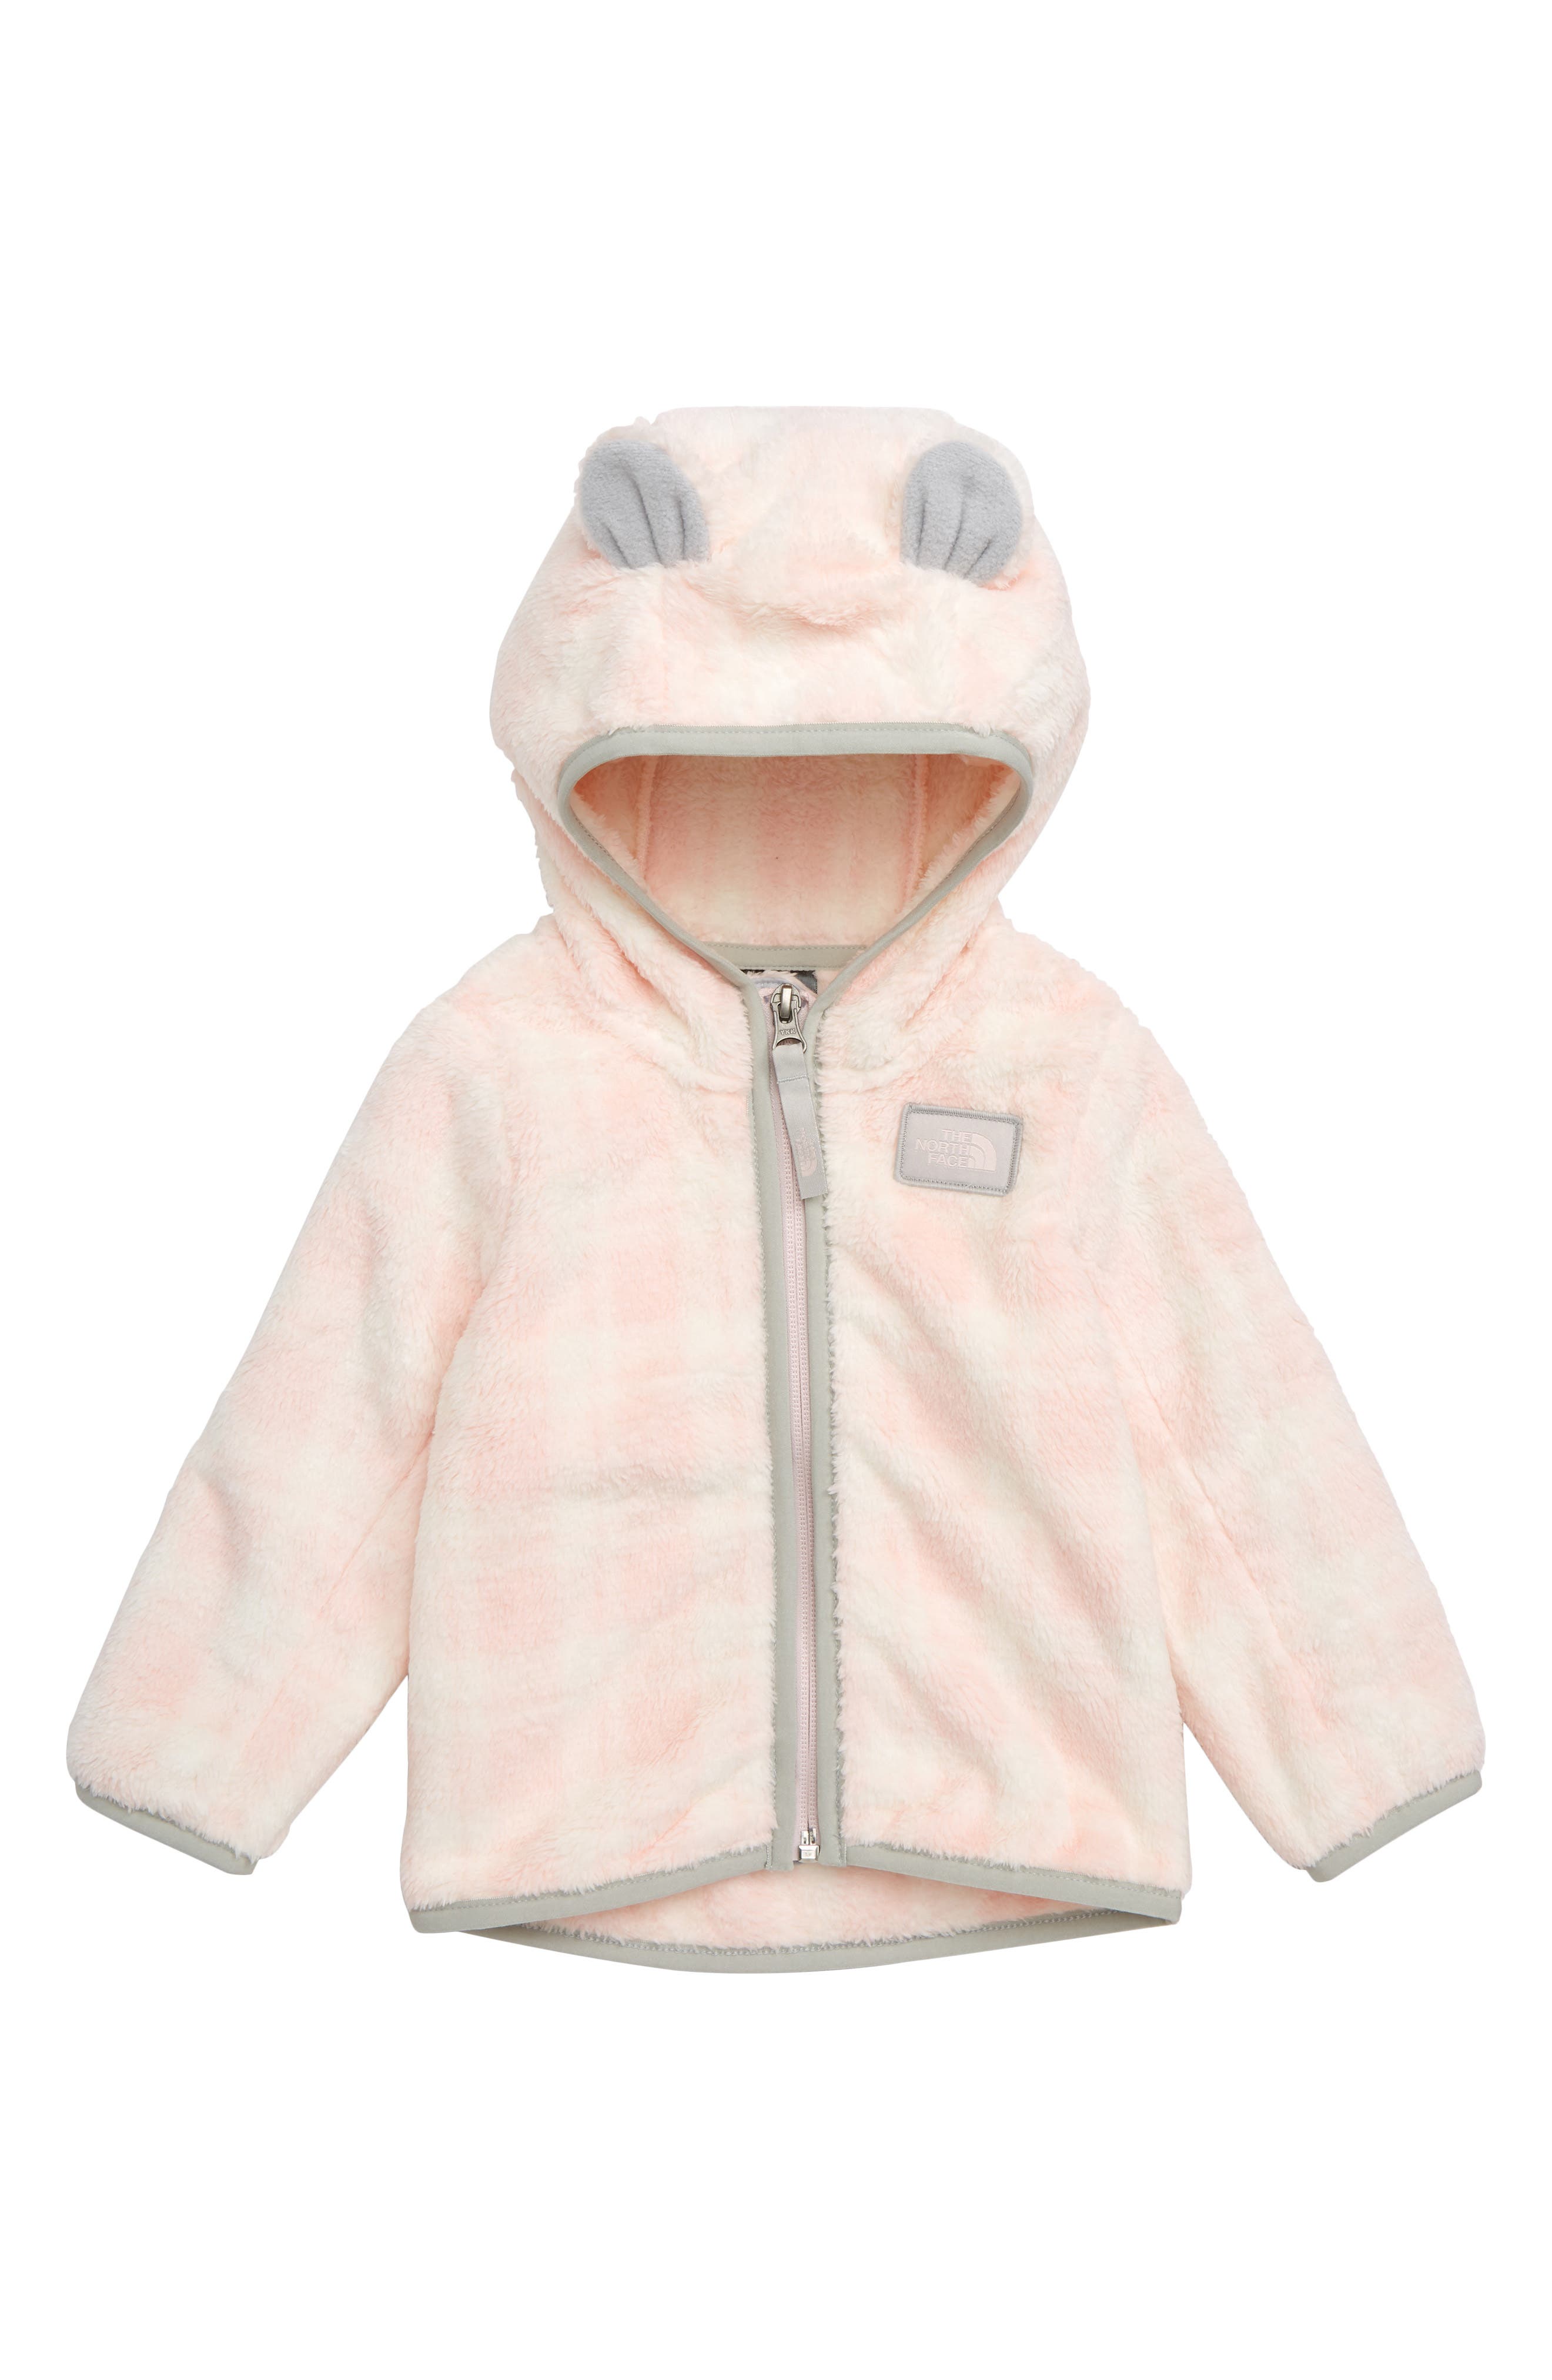 north face campshire bear hoodie